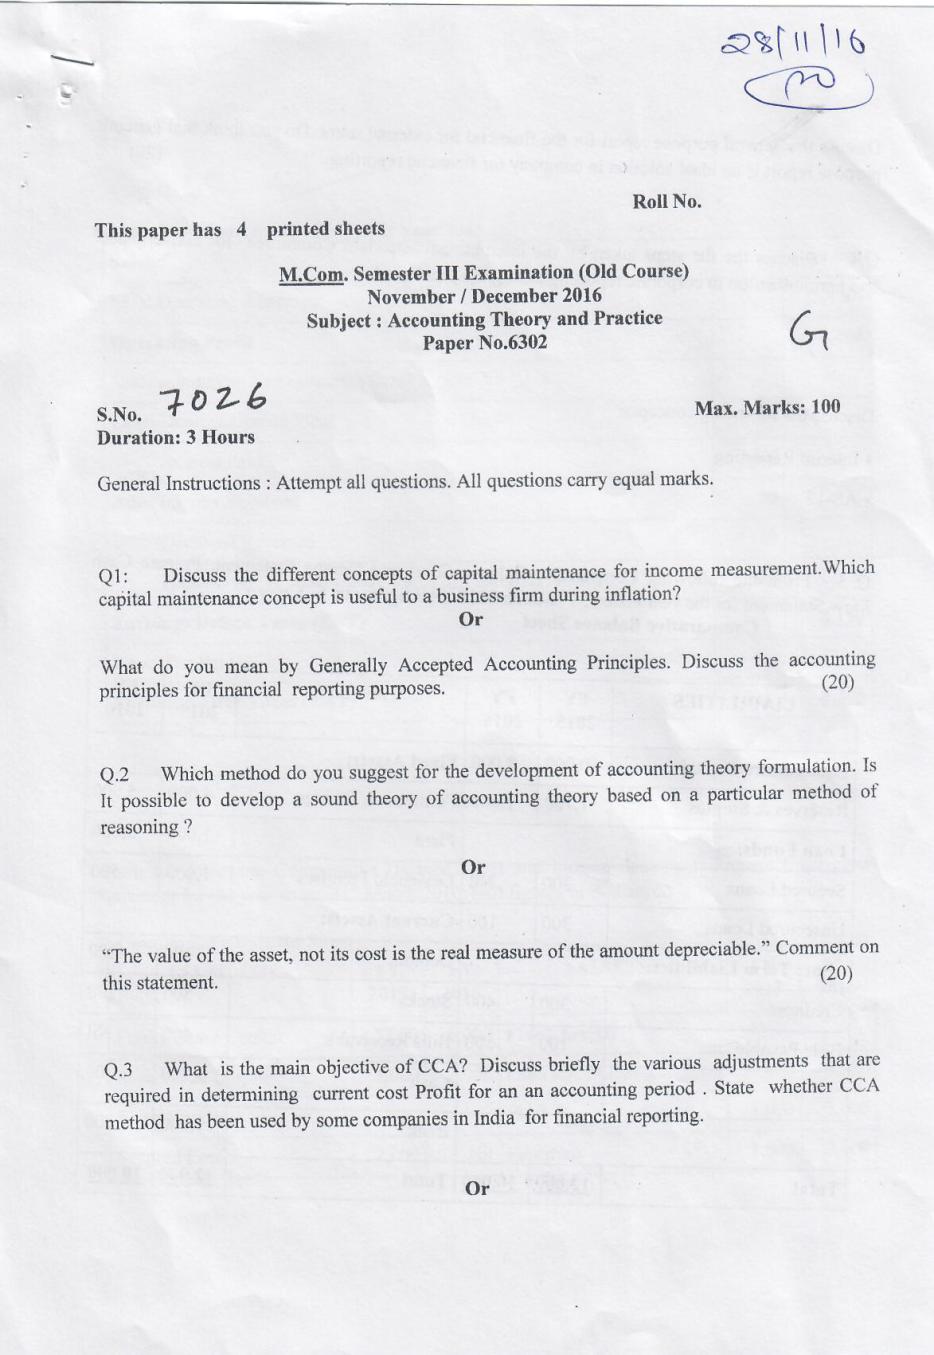 DU SOL M.Com Question Paper 2nd Year 2017 Sem 3 Accounting Theory And Practice Set 1 - Page 1